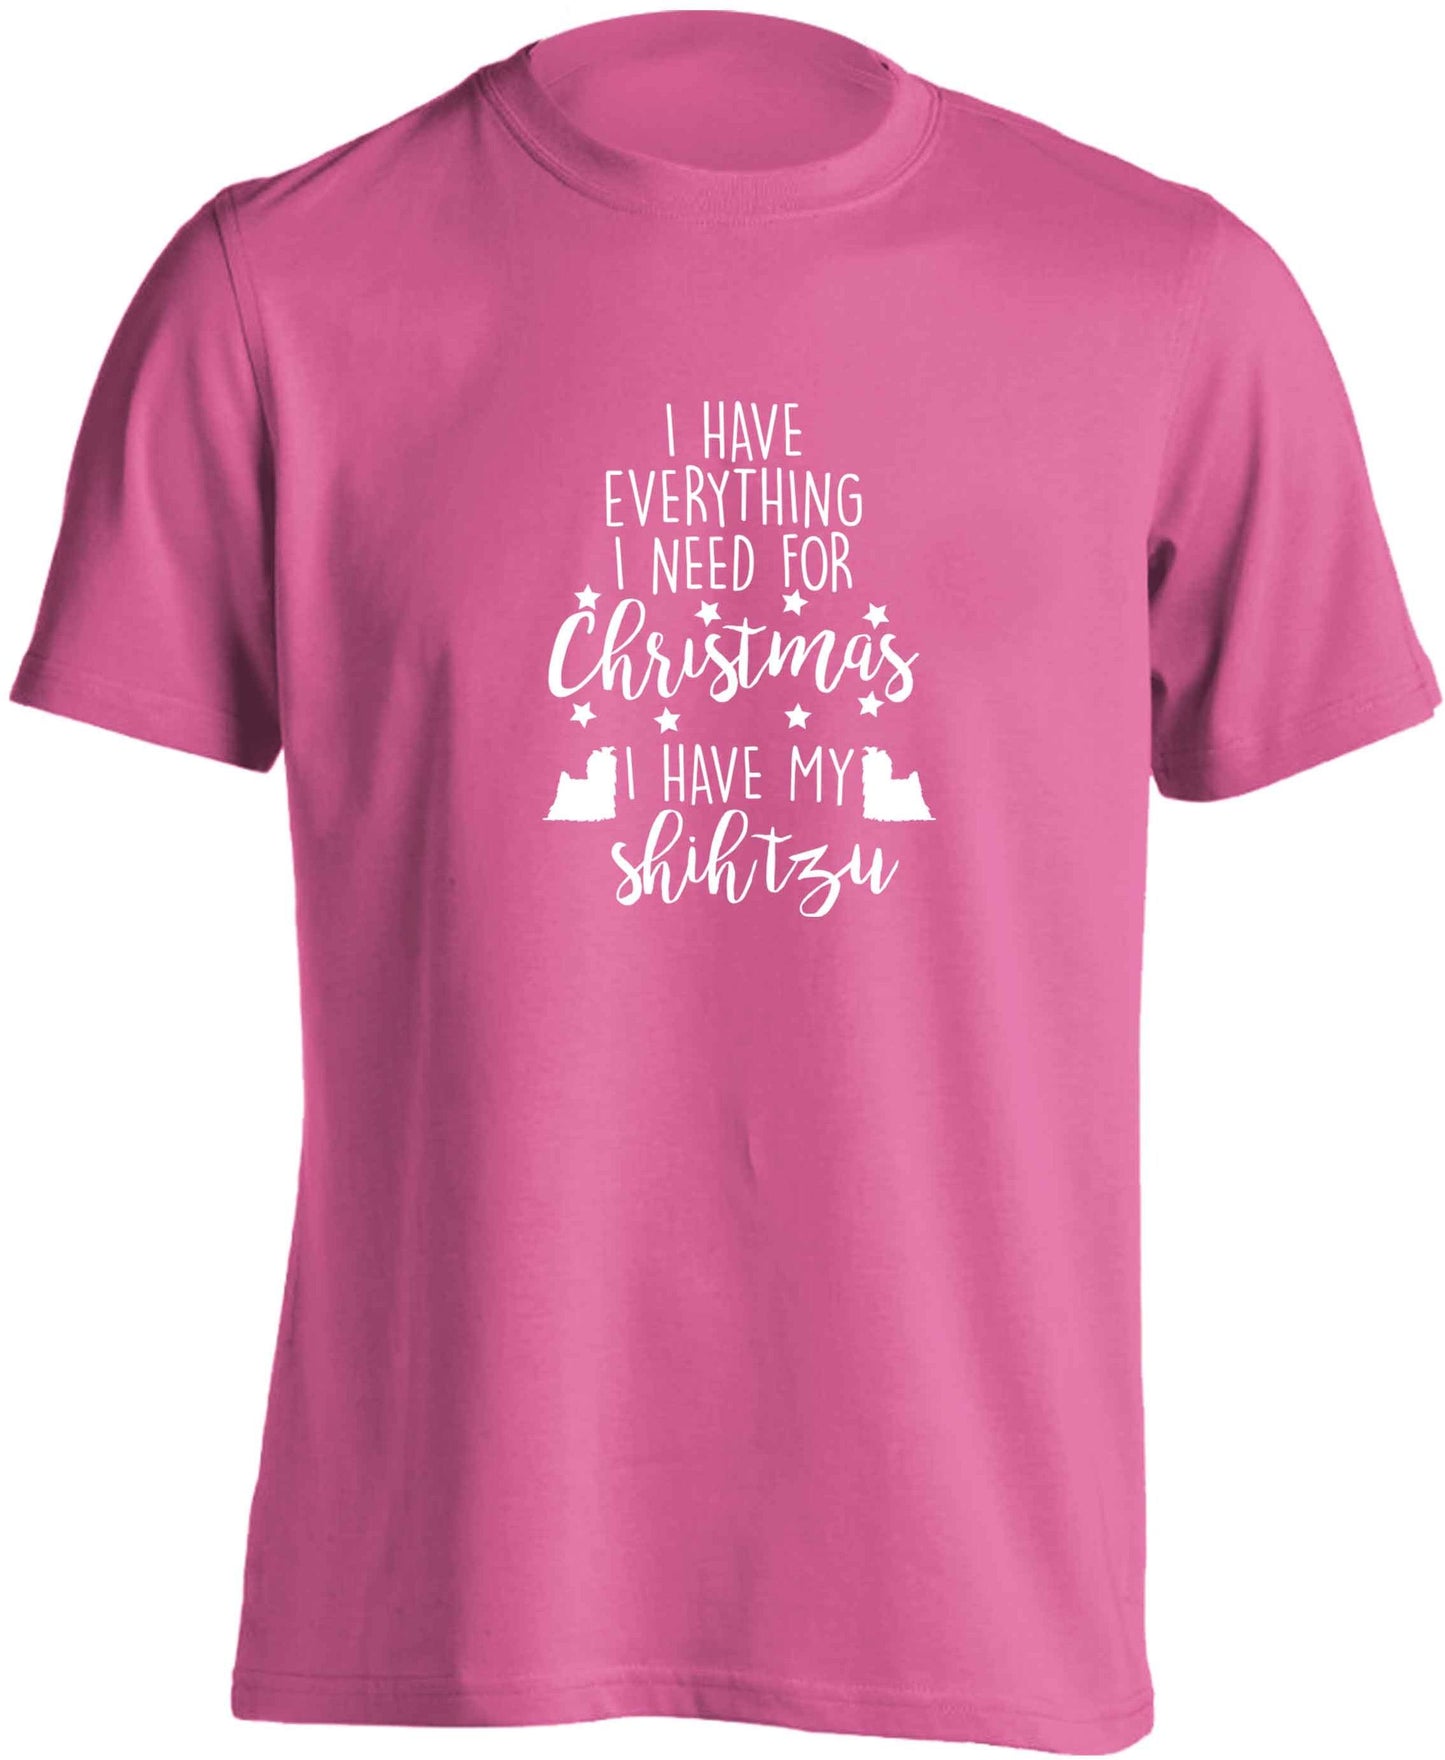 I have everything I need for Christmas I have my shih tzu adults unisex pink Tshirt 2XL